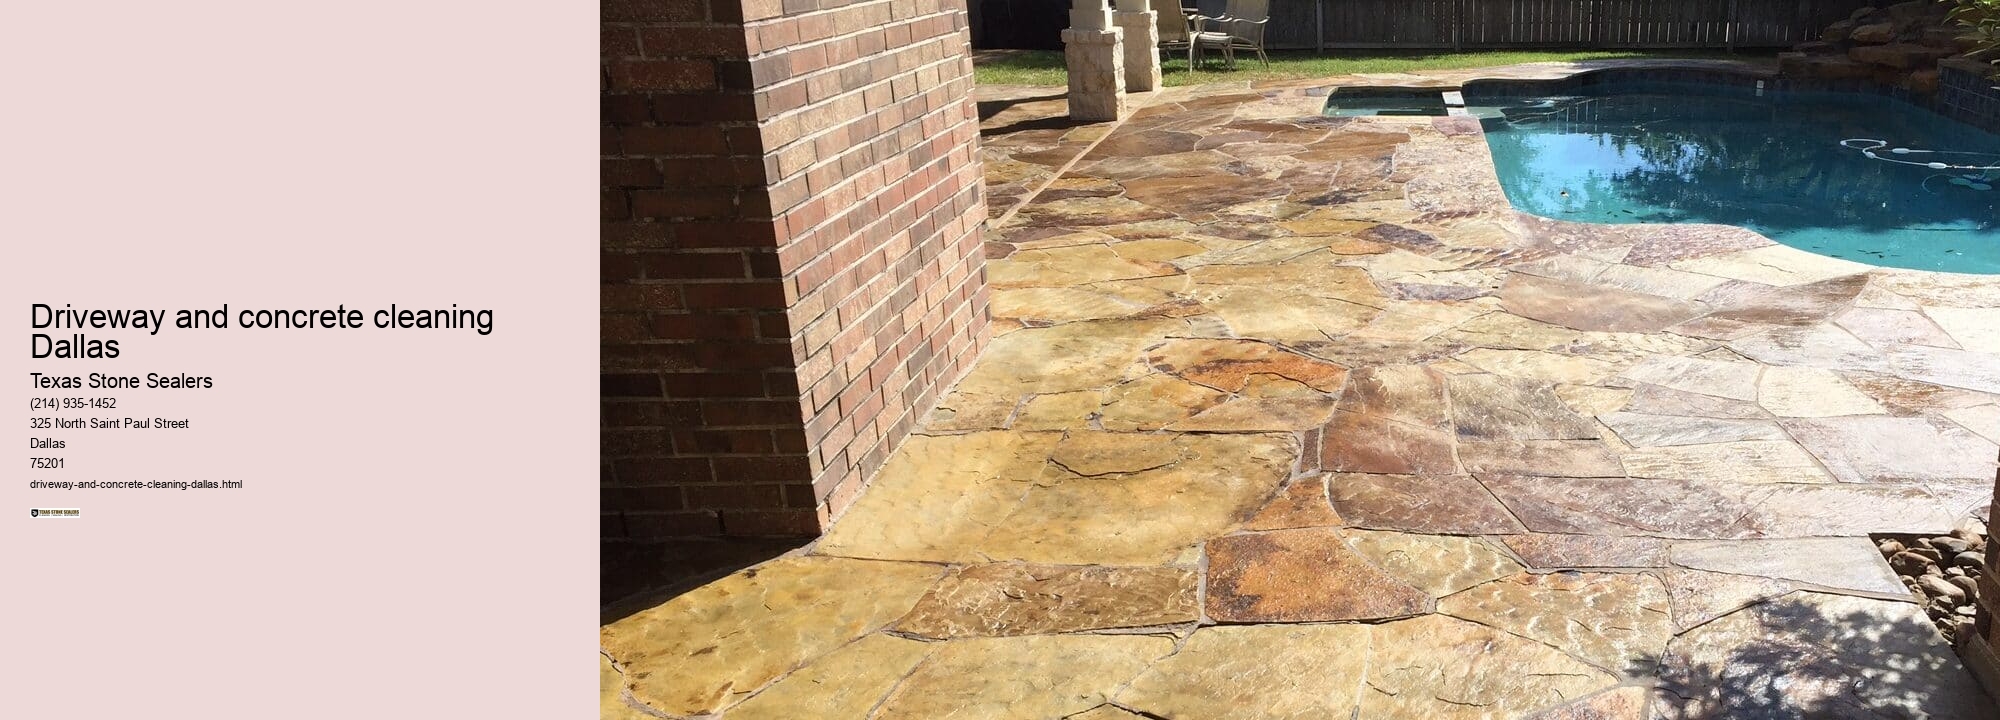 Driveway and concrete cleaning Dallas